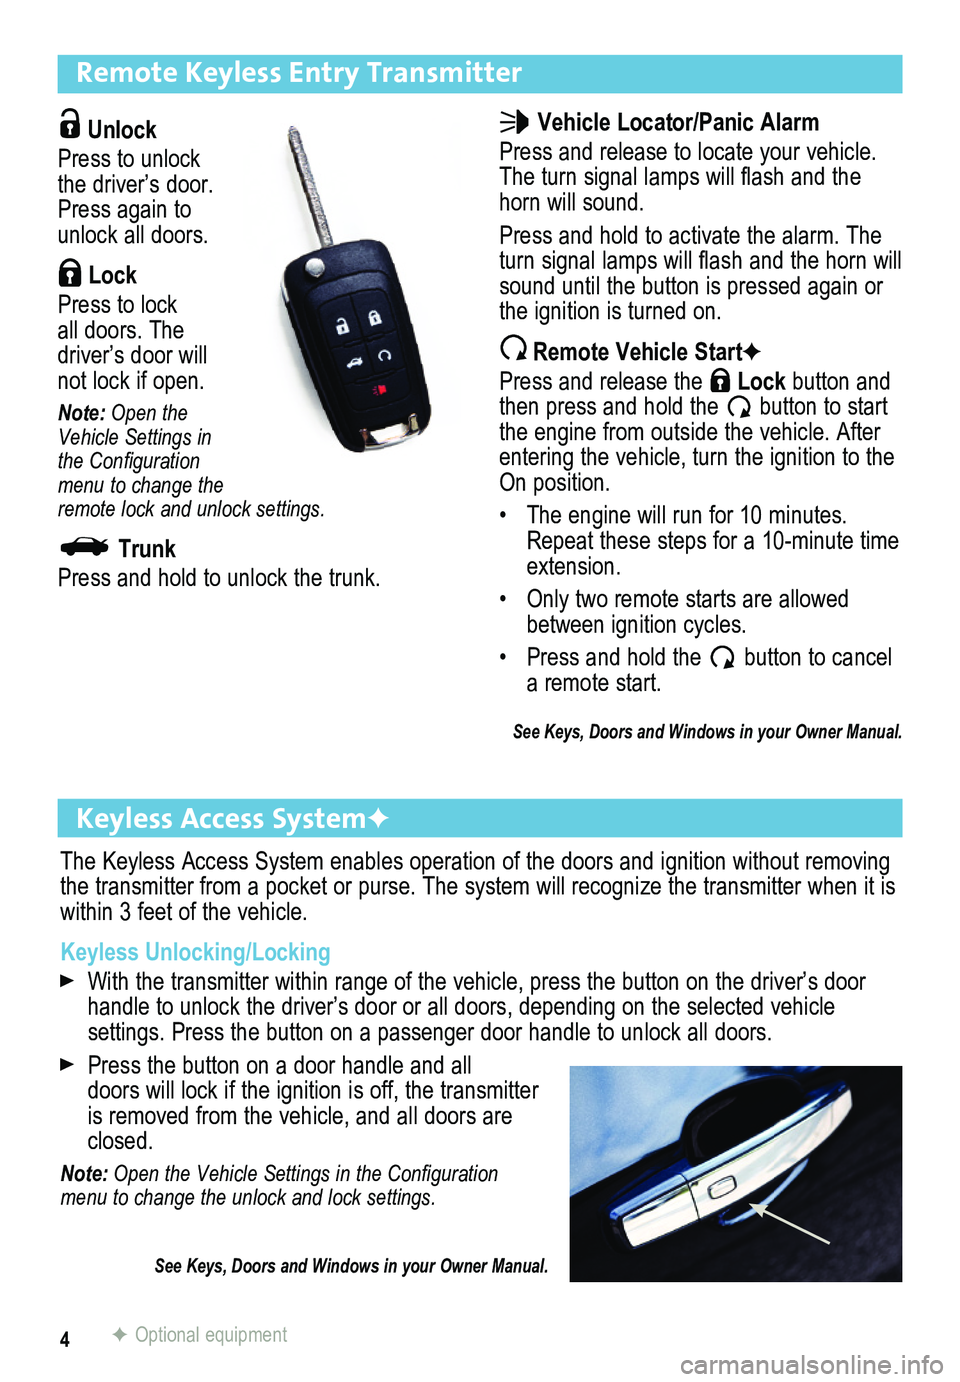 BUICK VERANO 2013  Get To Know Guide 4
Remote Keyless Entry Transmitter
 Unlock 
Press to unlock the  driver’s door. Press again to unlock all doors.
 Lock 
Press to lock  all doors. The  driver’s door will not lock if open. 
Note: O